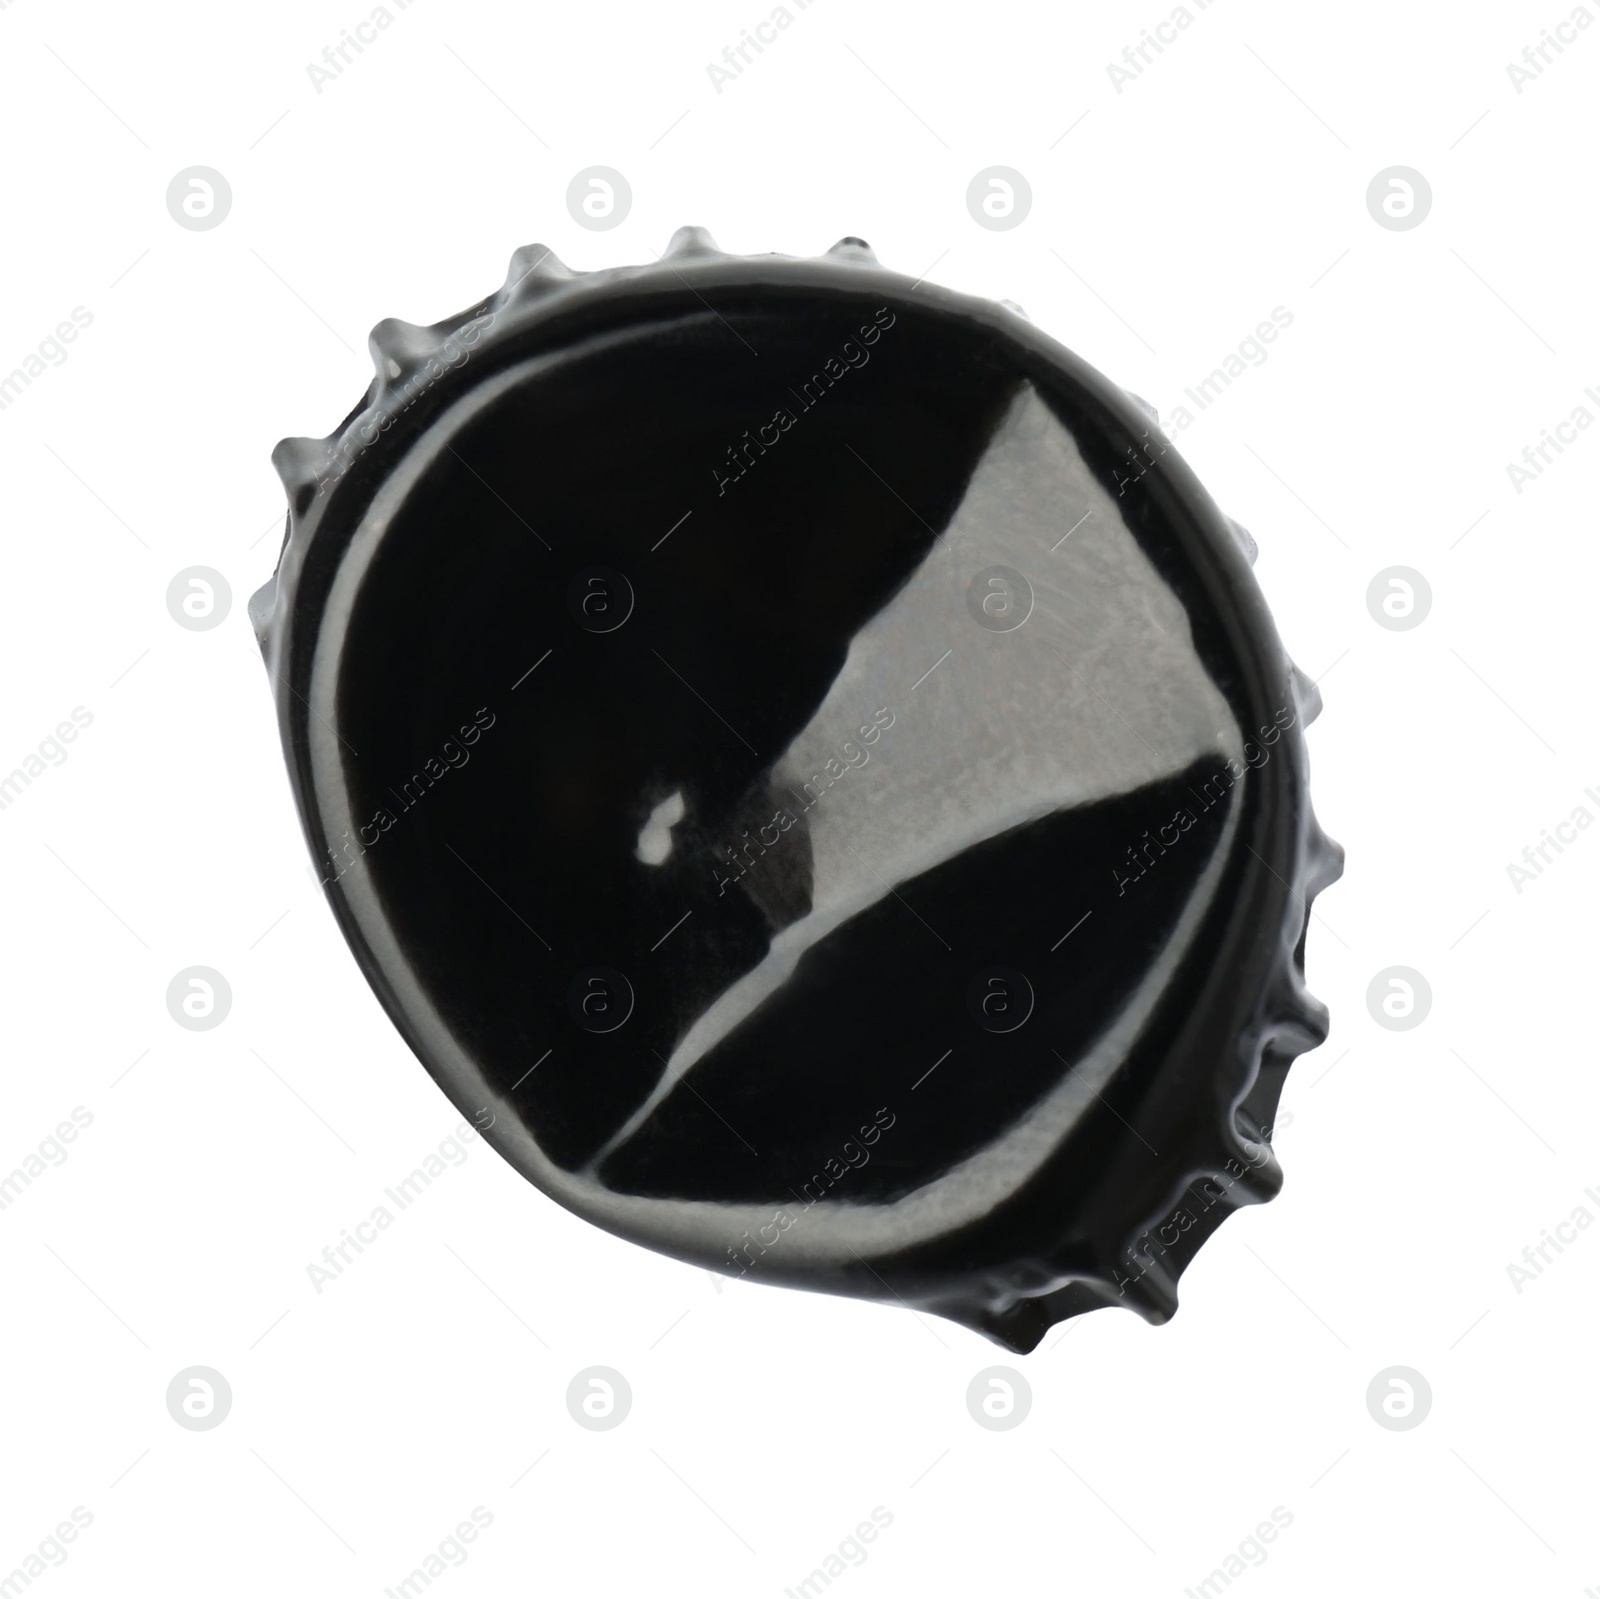 Photo of One black beer bottle cap isolated on white